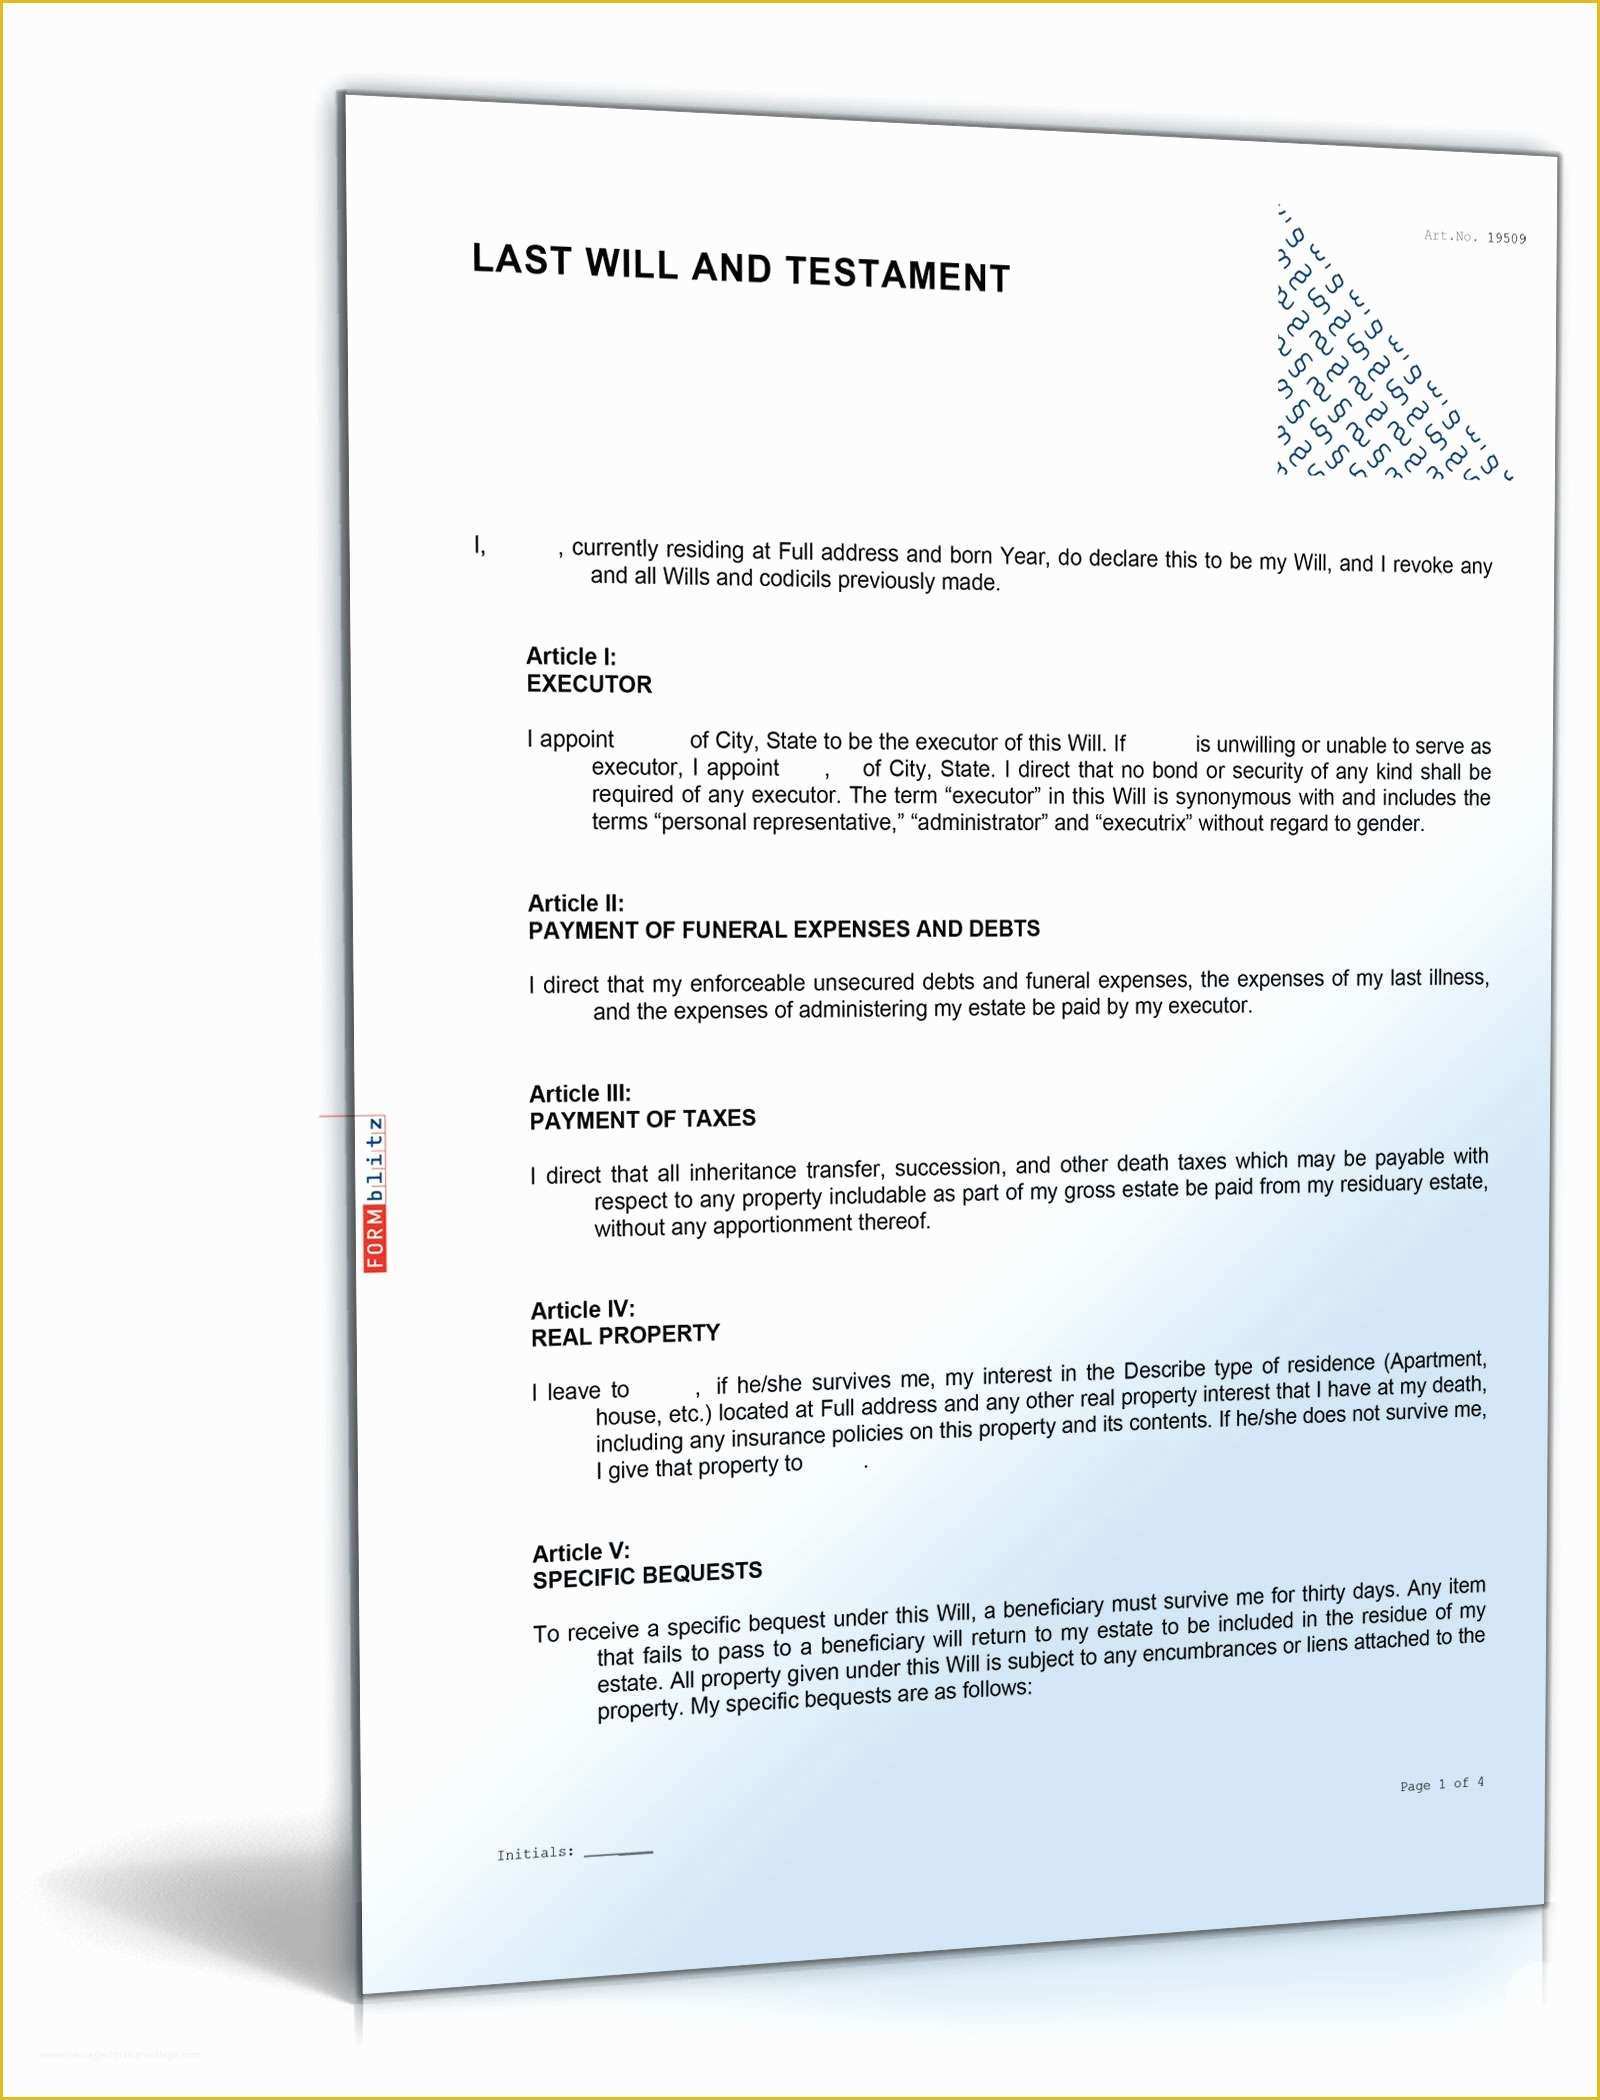 California Last Will and Testament Free Template Of California Last Will and Testament Sample form Direct to